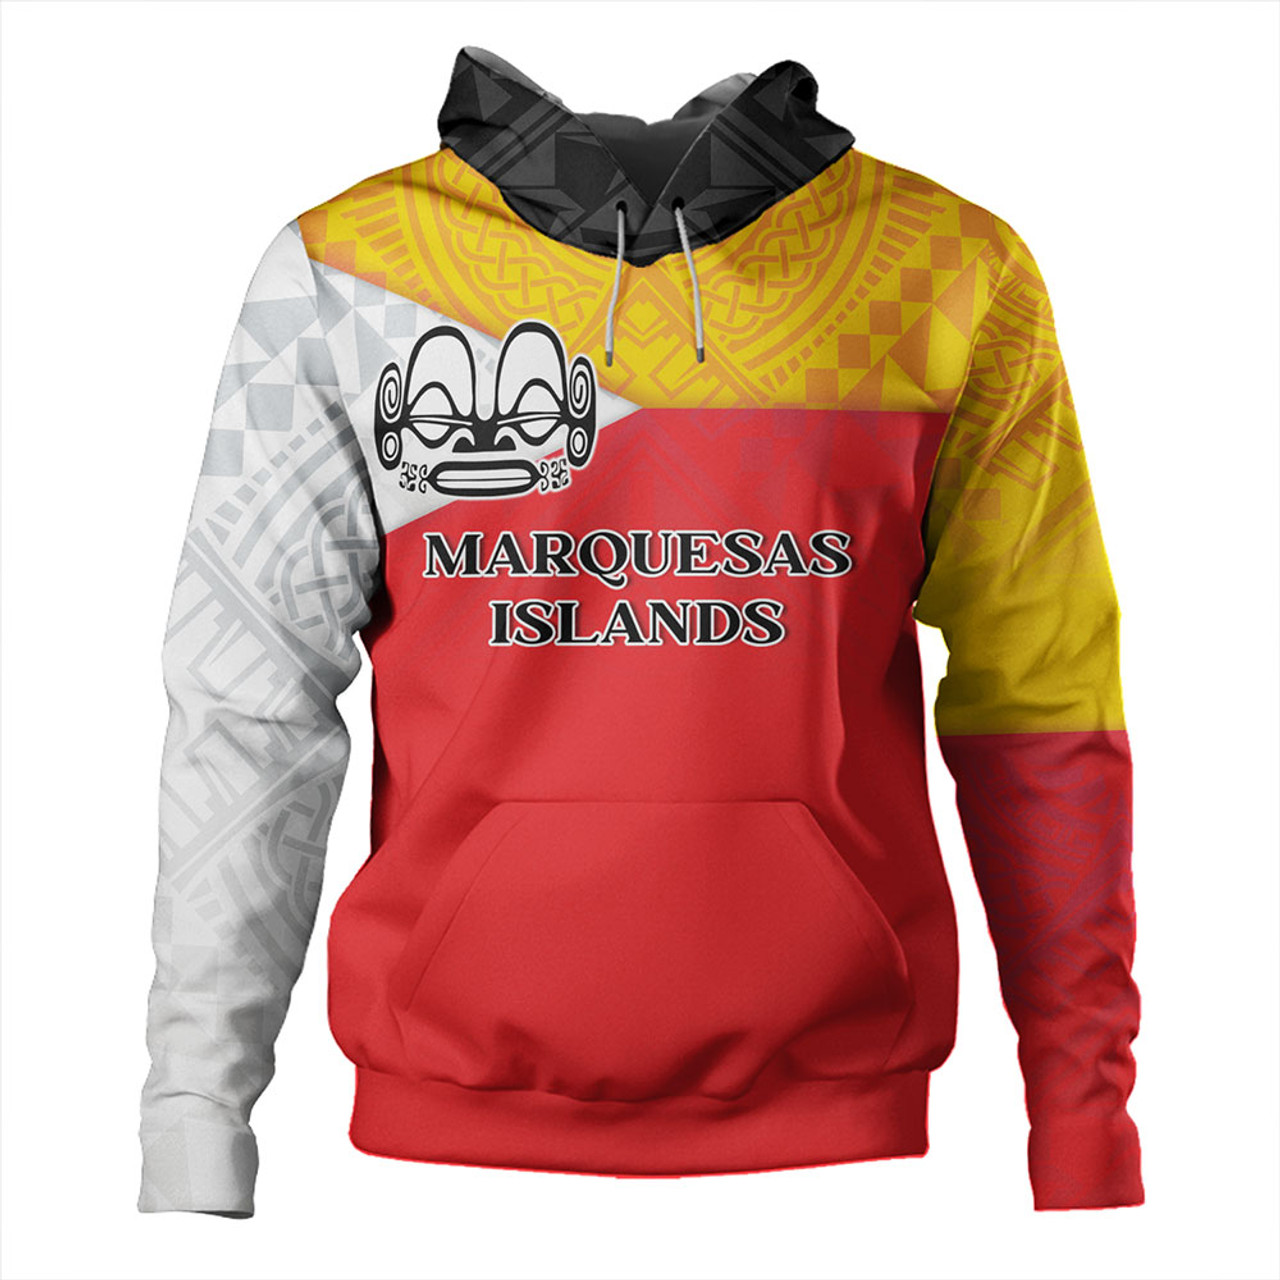 Marquesas Islands Hoodie Flag Color With Traditional Patterns